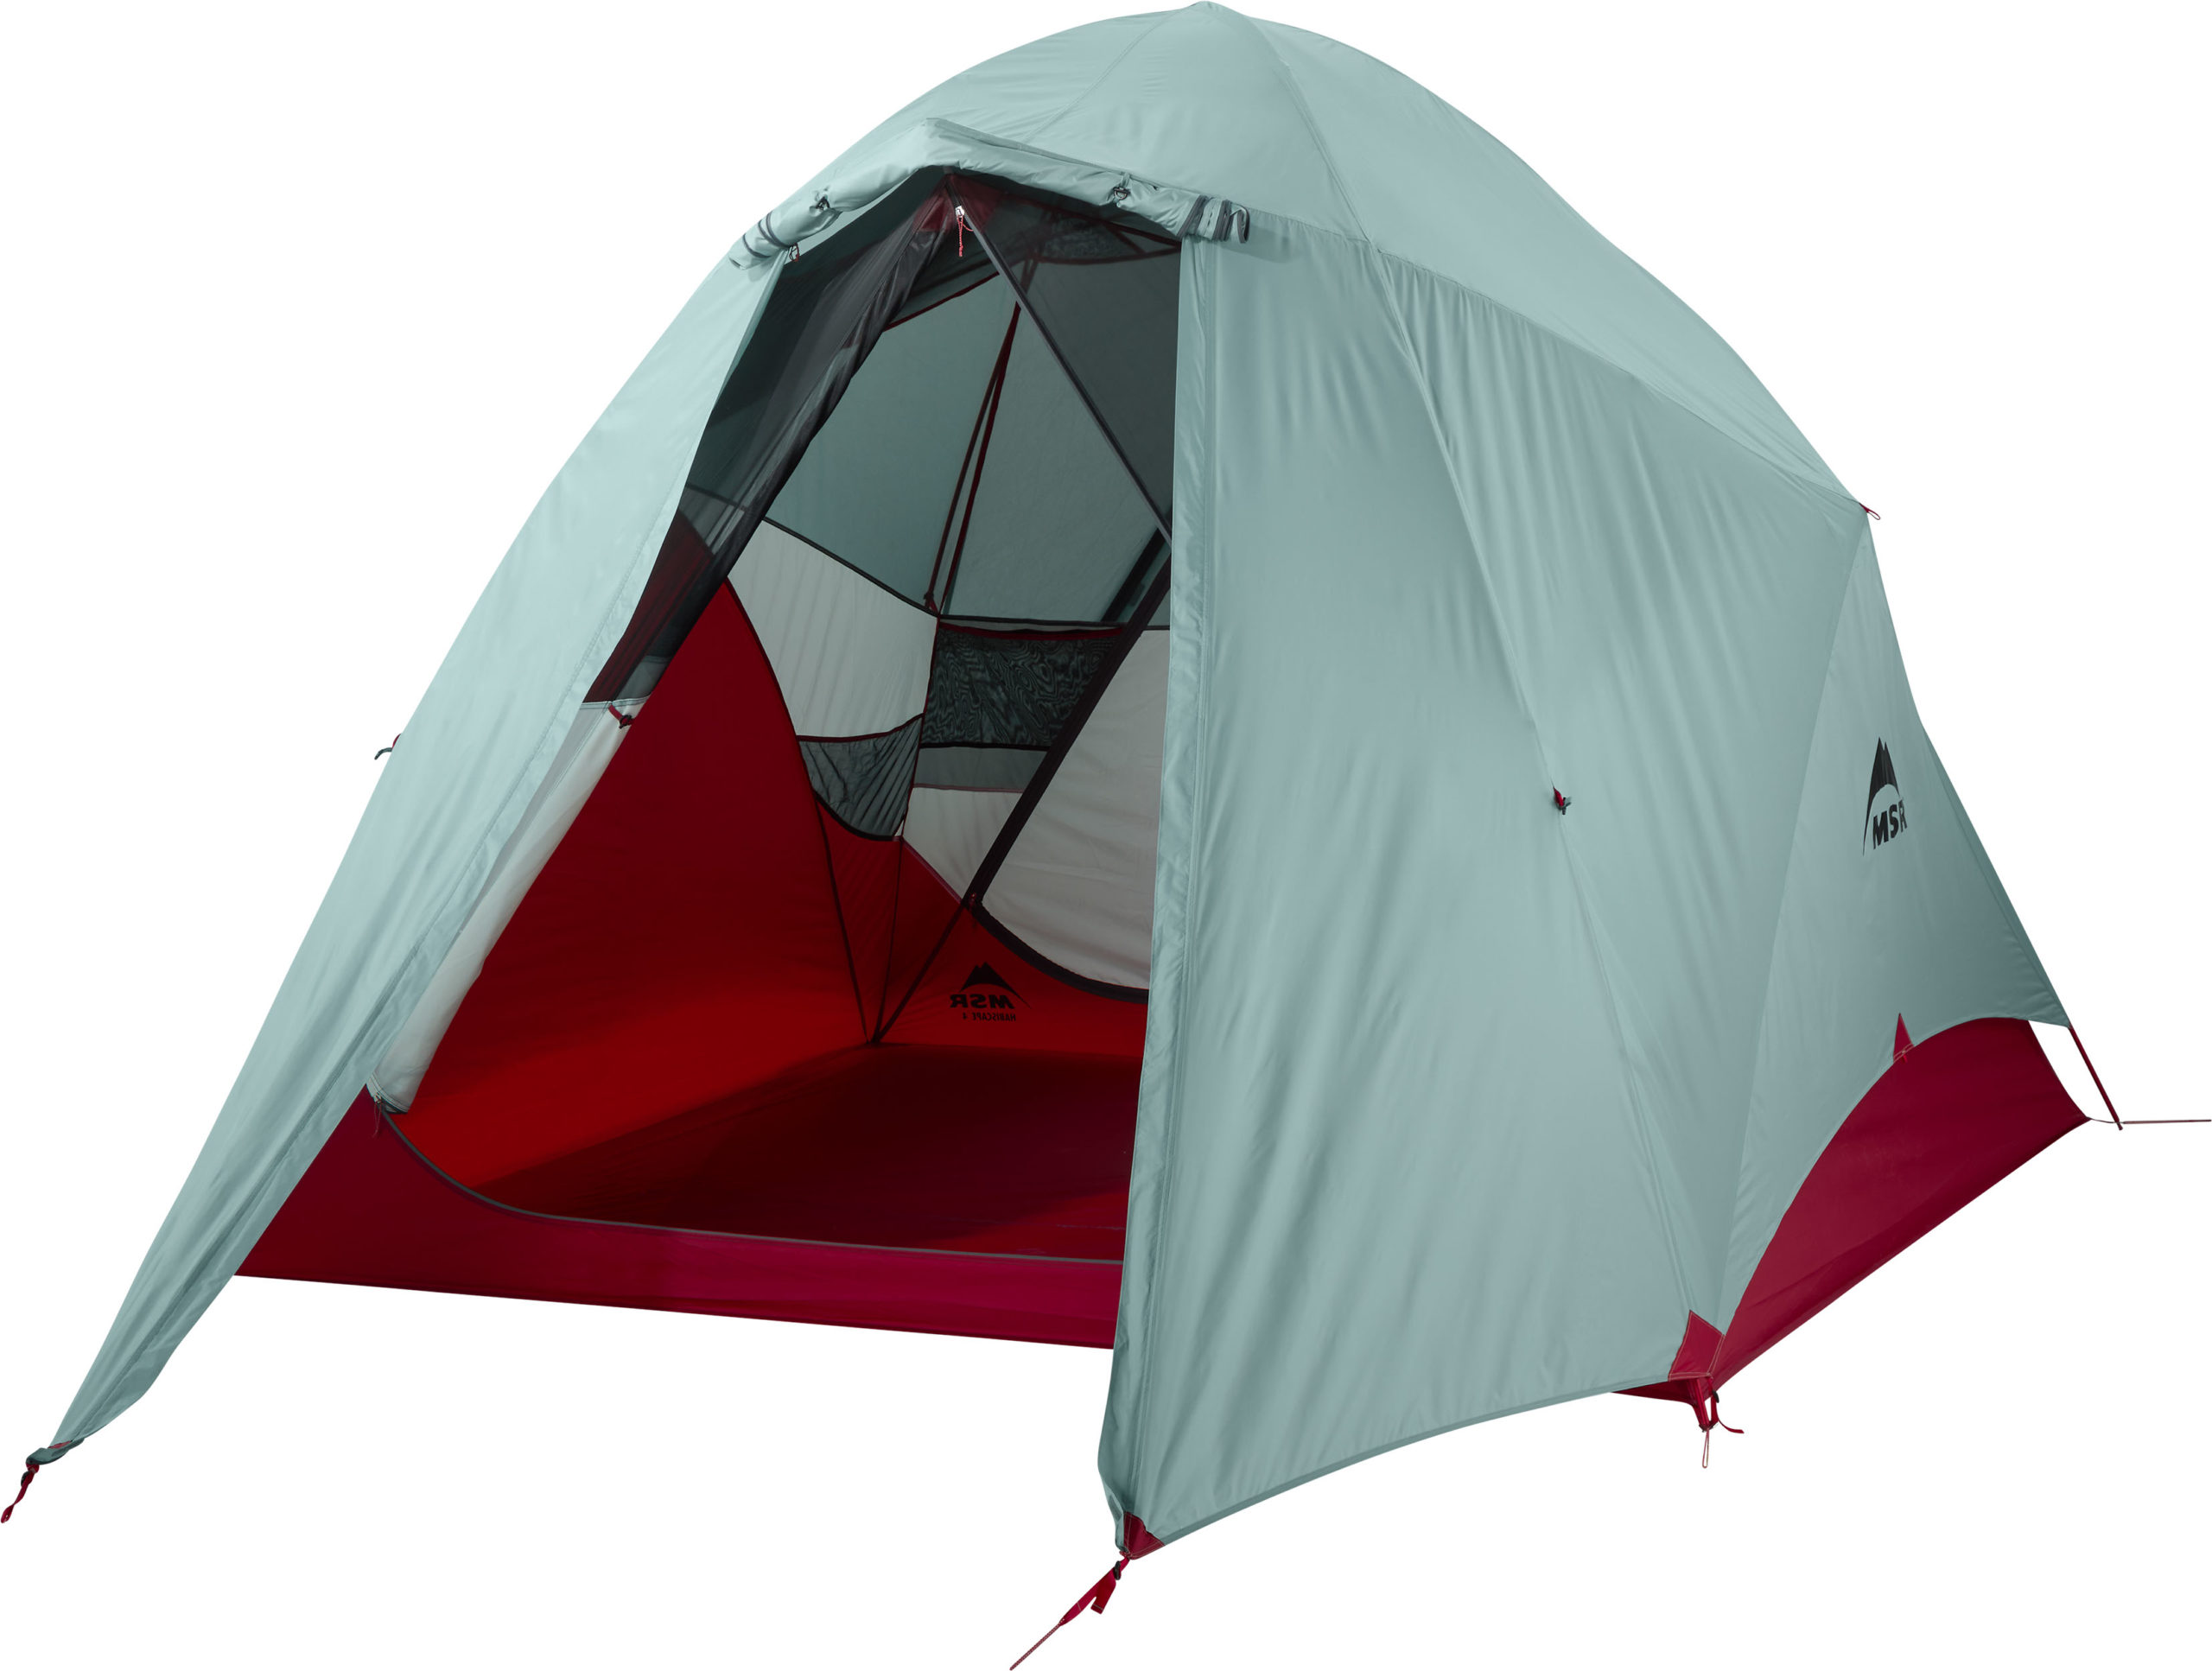 Palatial Family Party Tent: MSR Habiscape Tent Review